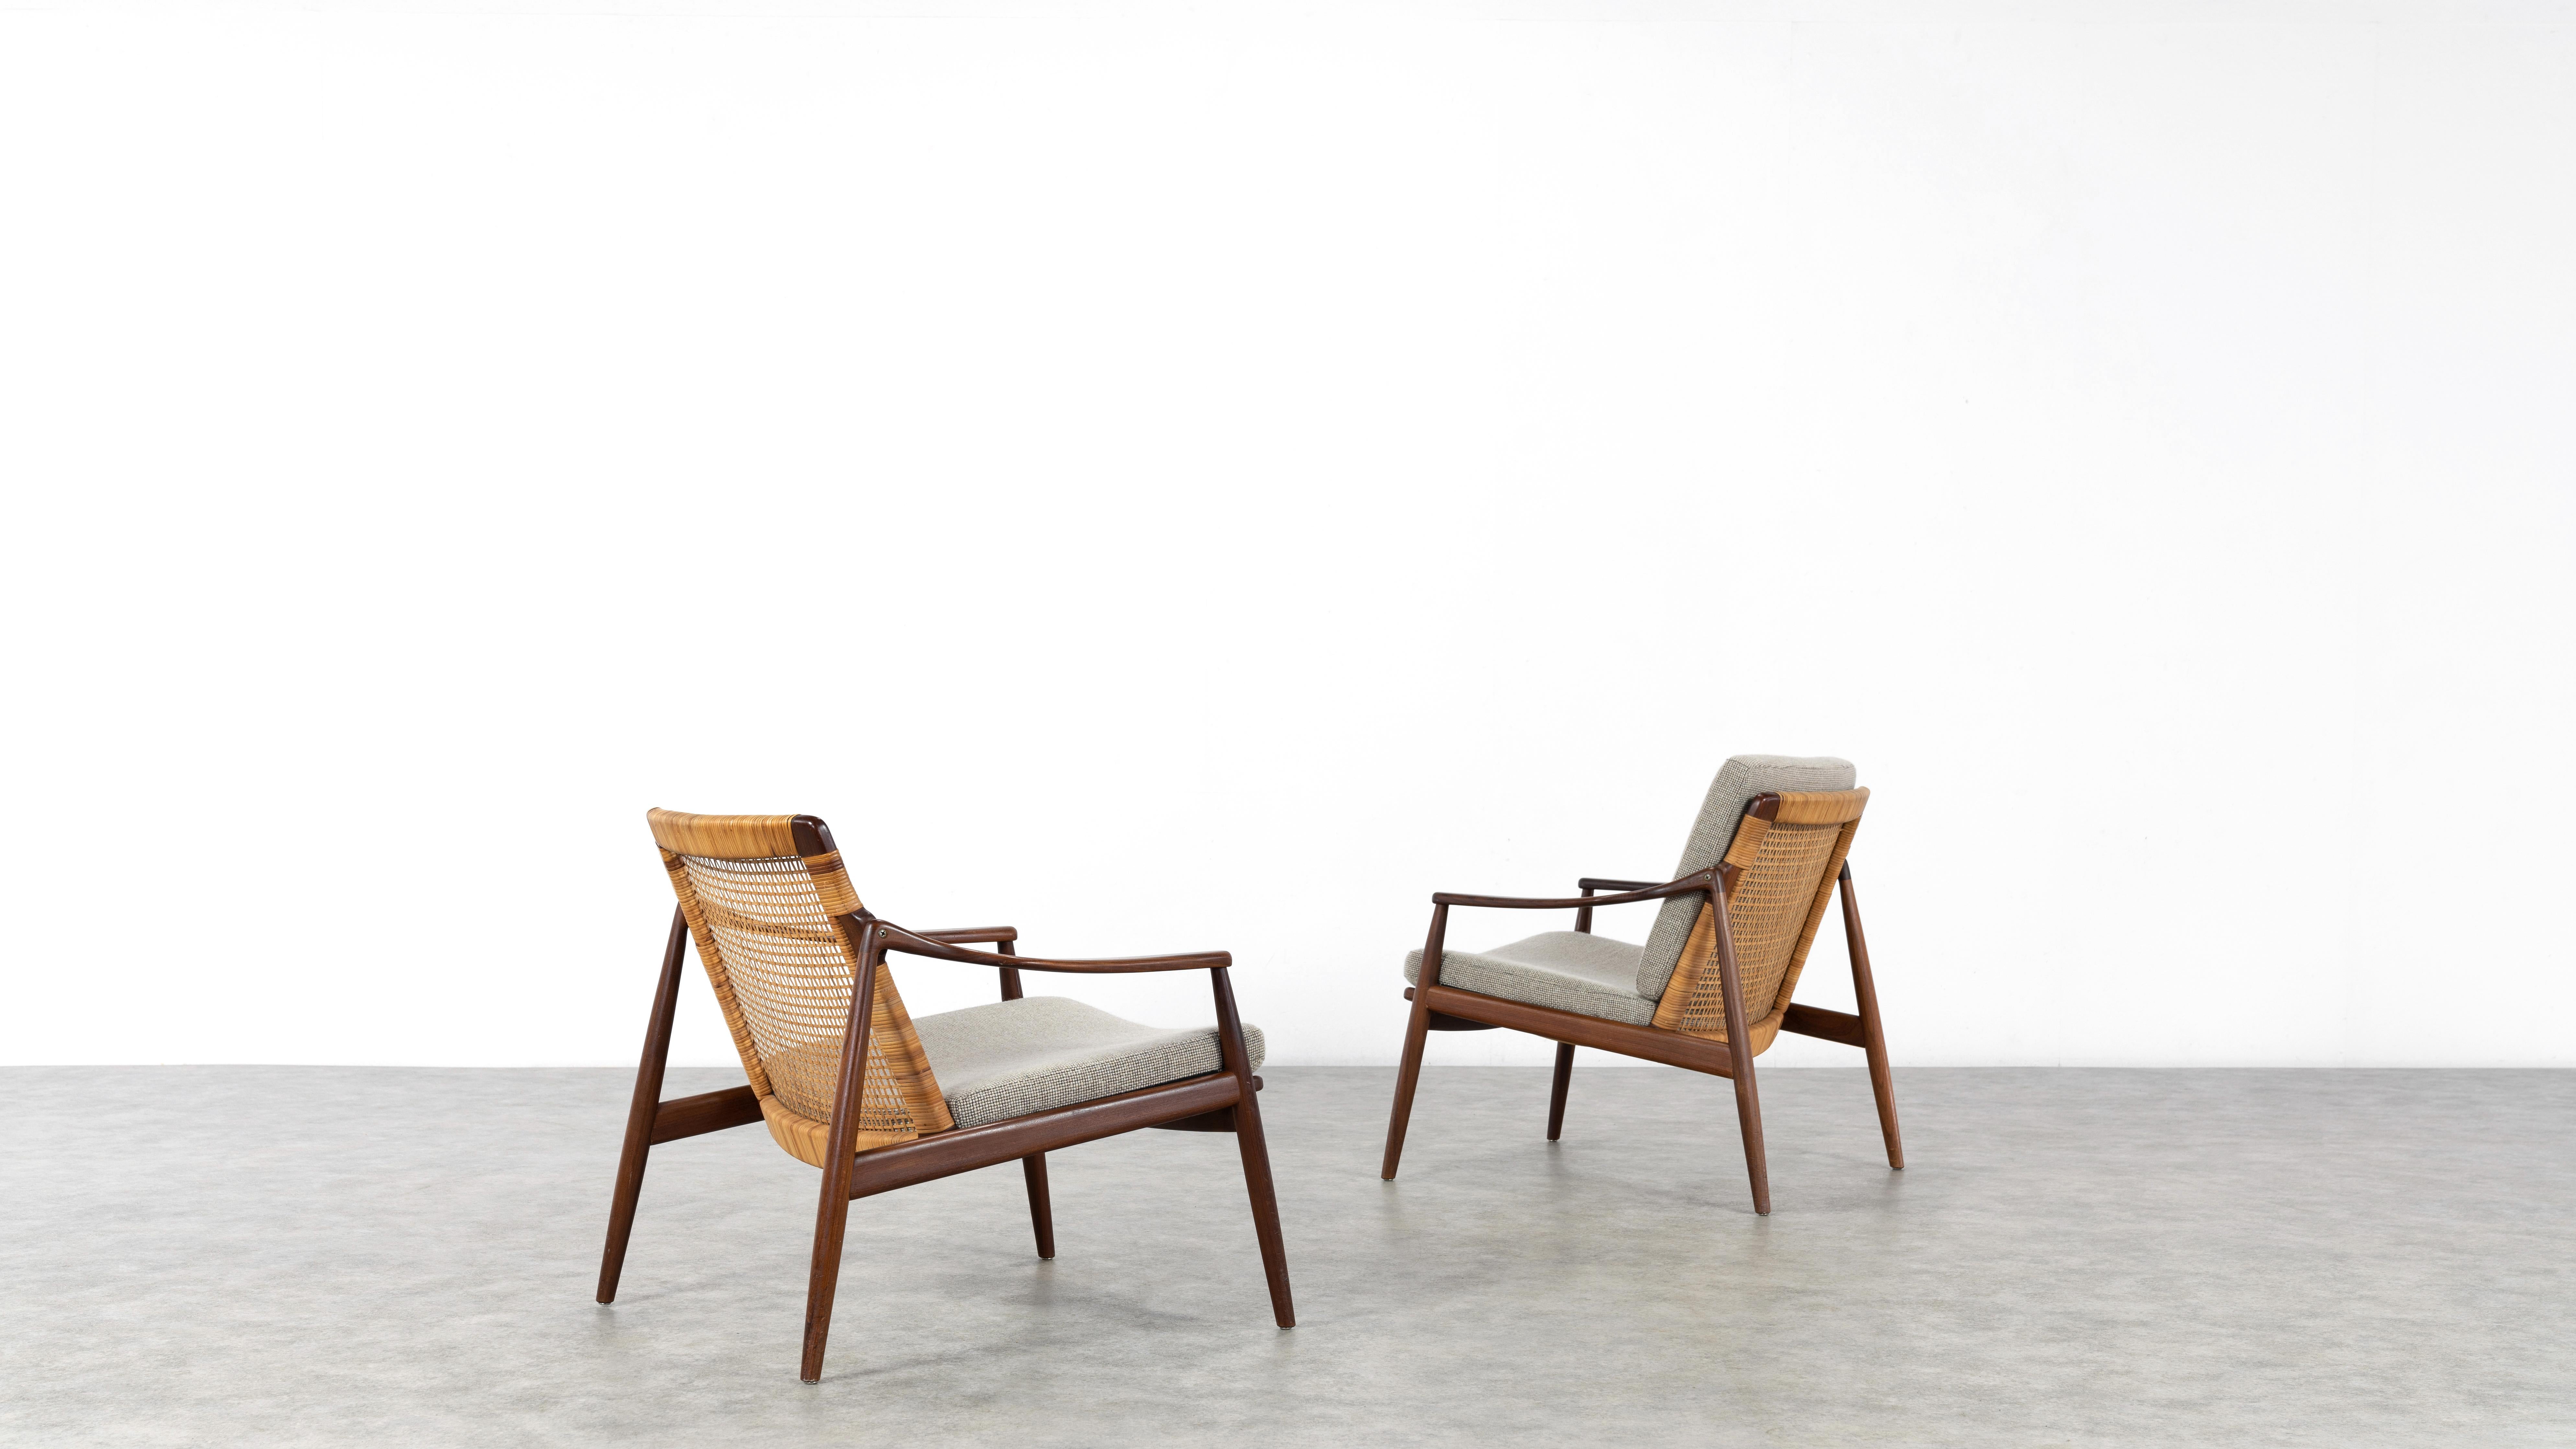 Extremely rare pair of Lounge chairs designed by Hartmut Lohmeyer for Wilkhahn in the 1962.
Made in Germany by Wilkhahn.

Beautifully shaped, the cane and the walnut frame are in an very nice condition.
Newly upholstered in salt `n pepper